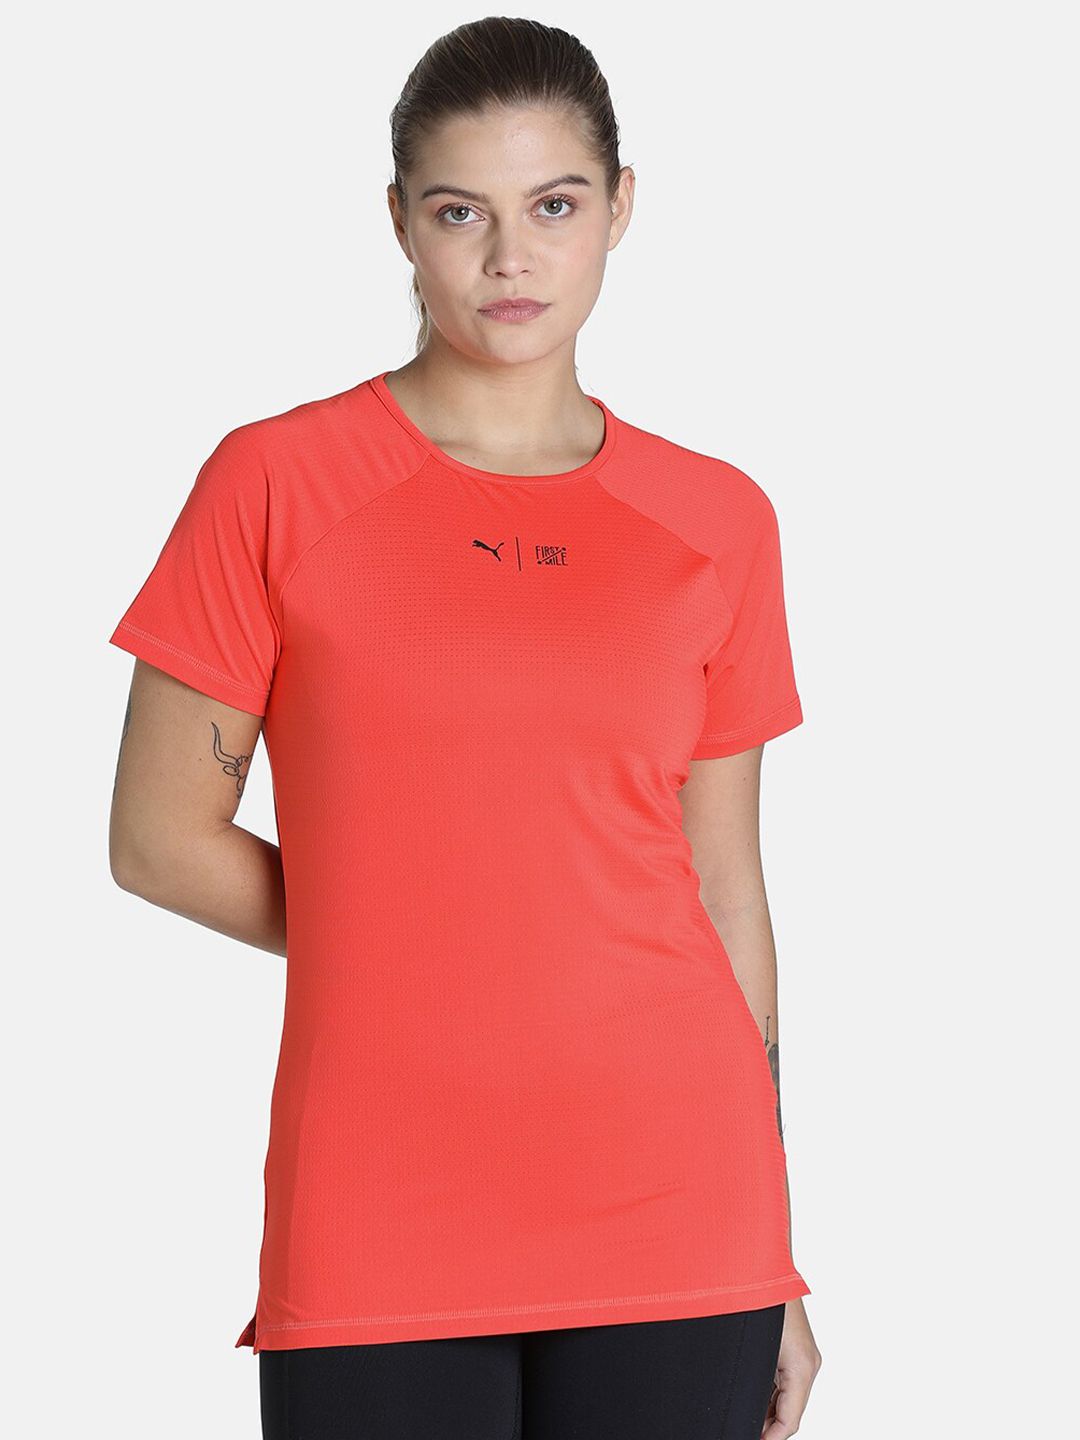 Puma Women Coral PUMA x FIRST MILE Running T-Shirt Price in India